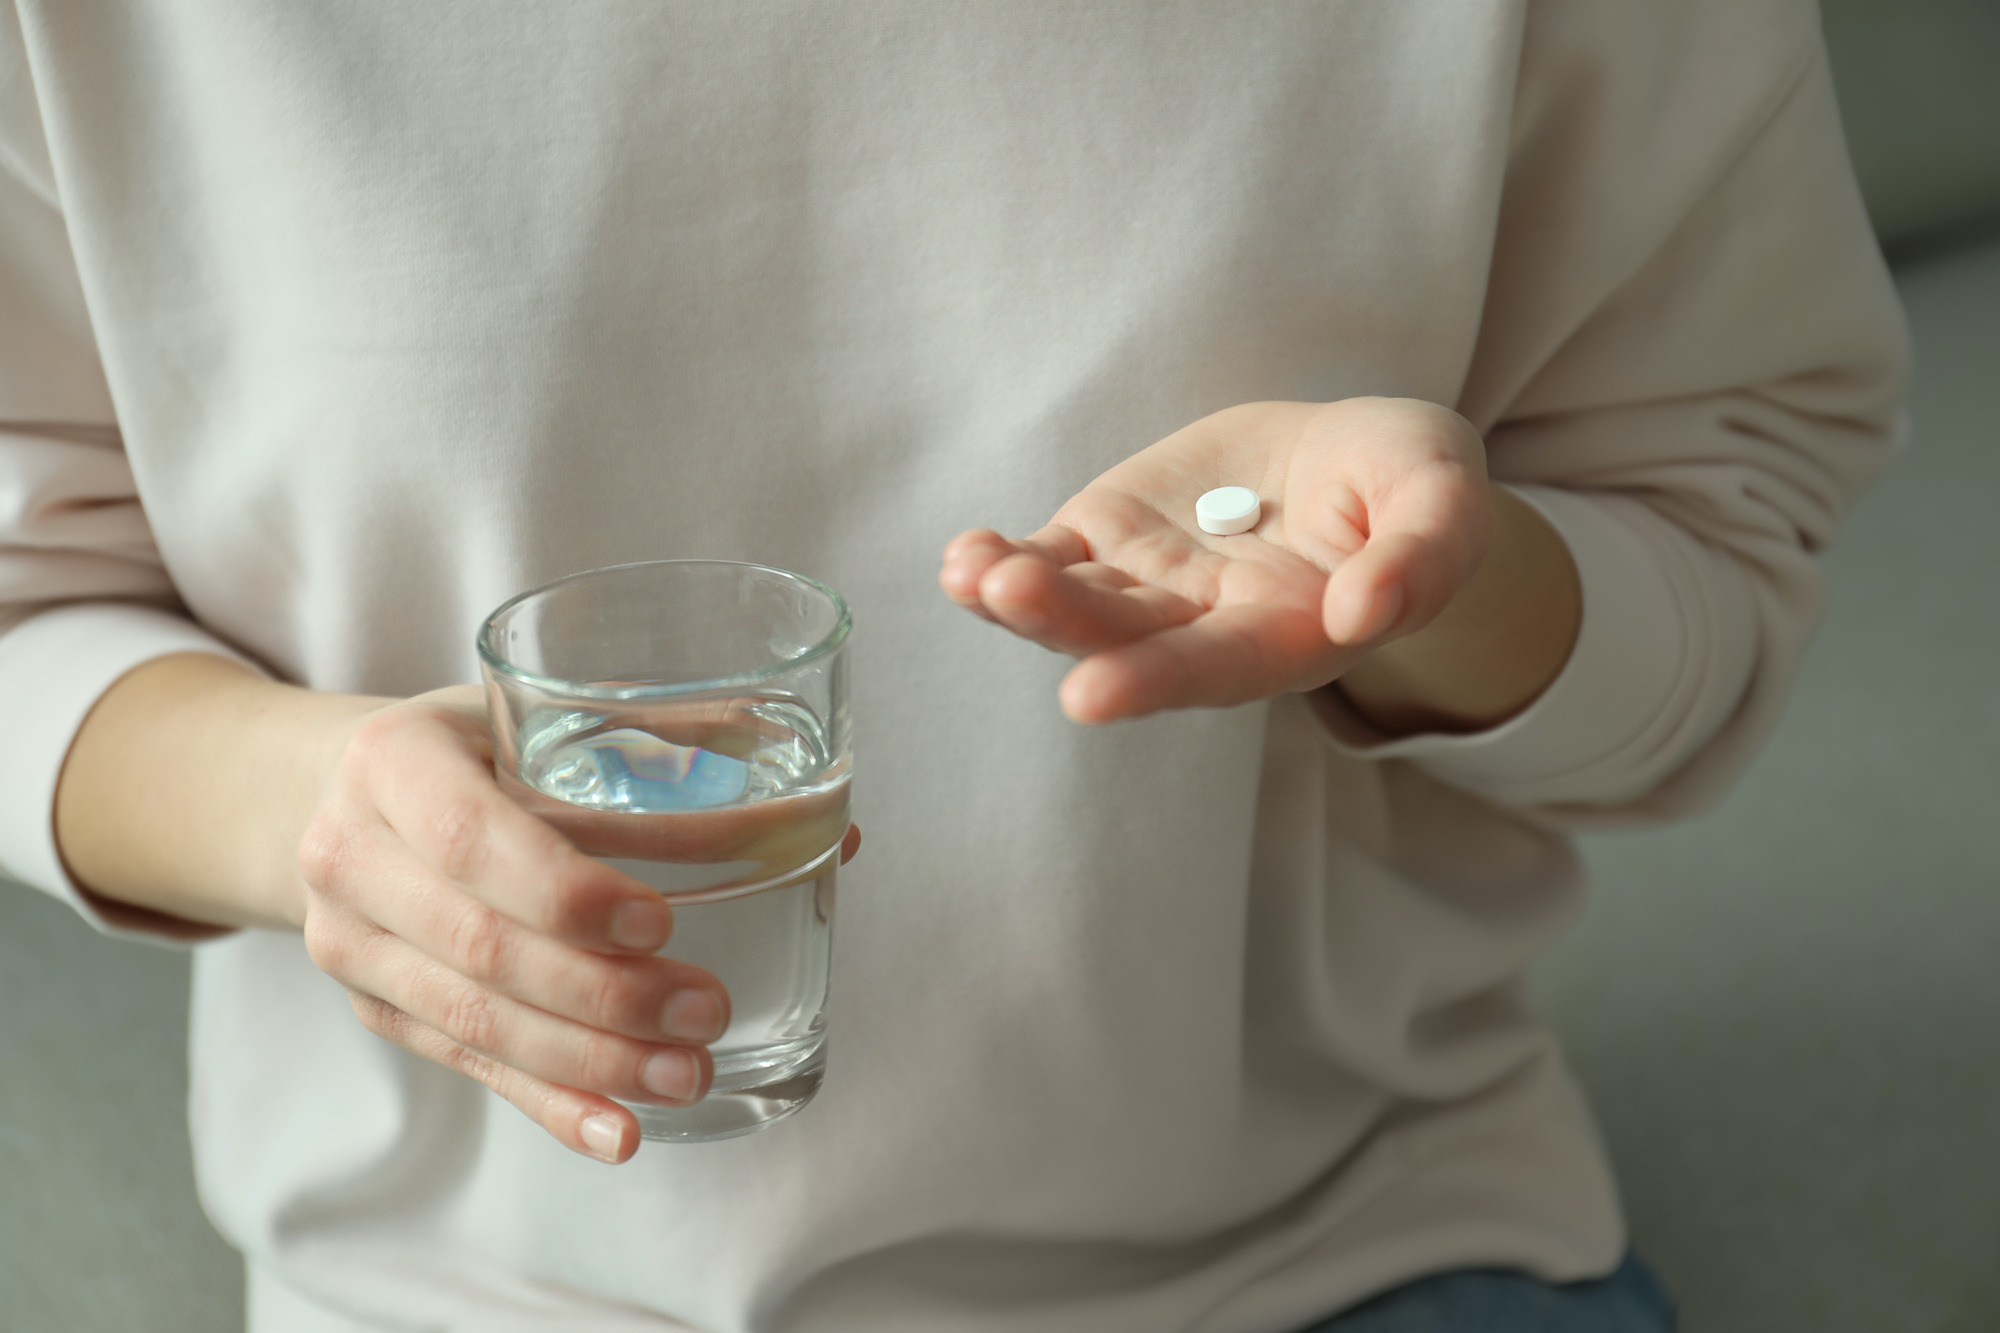 A young woman holding an abortion pill and glass of water